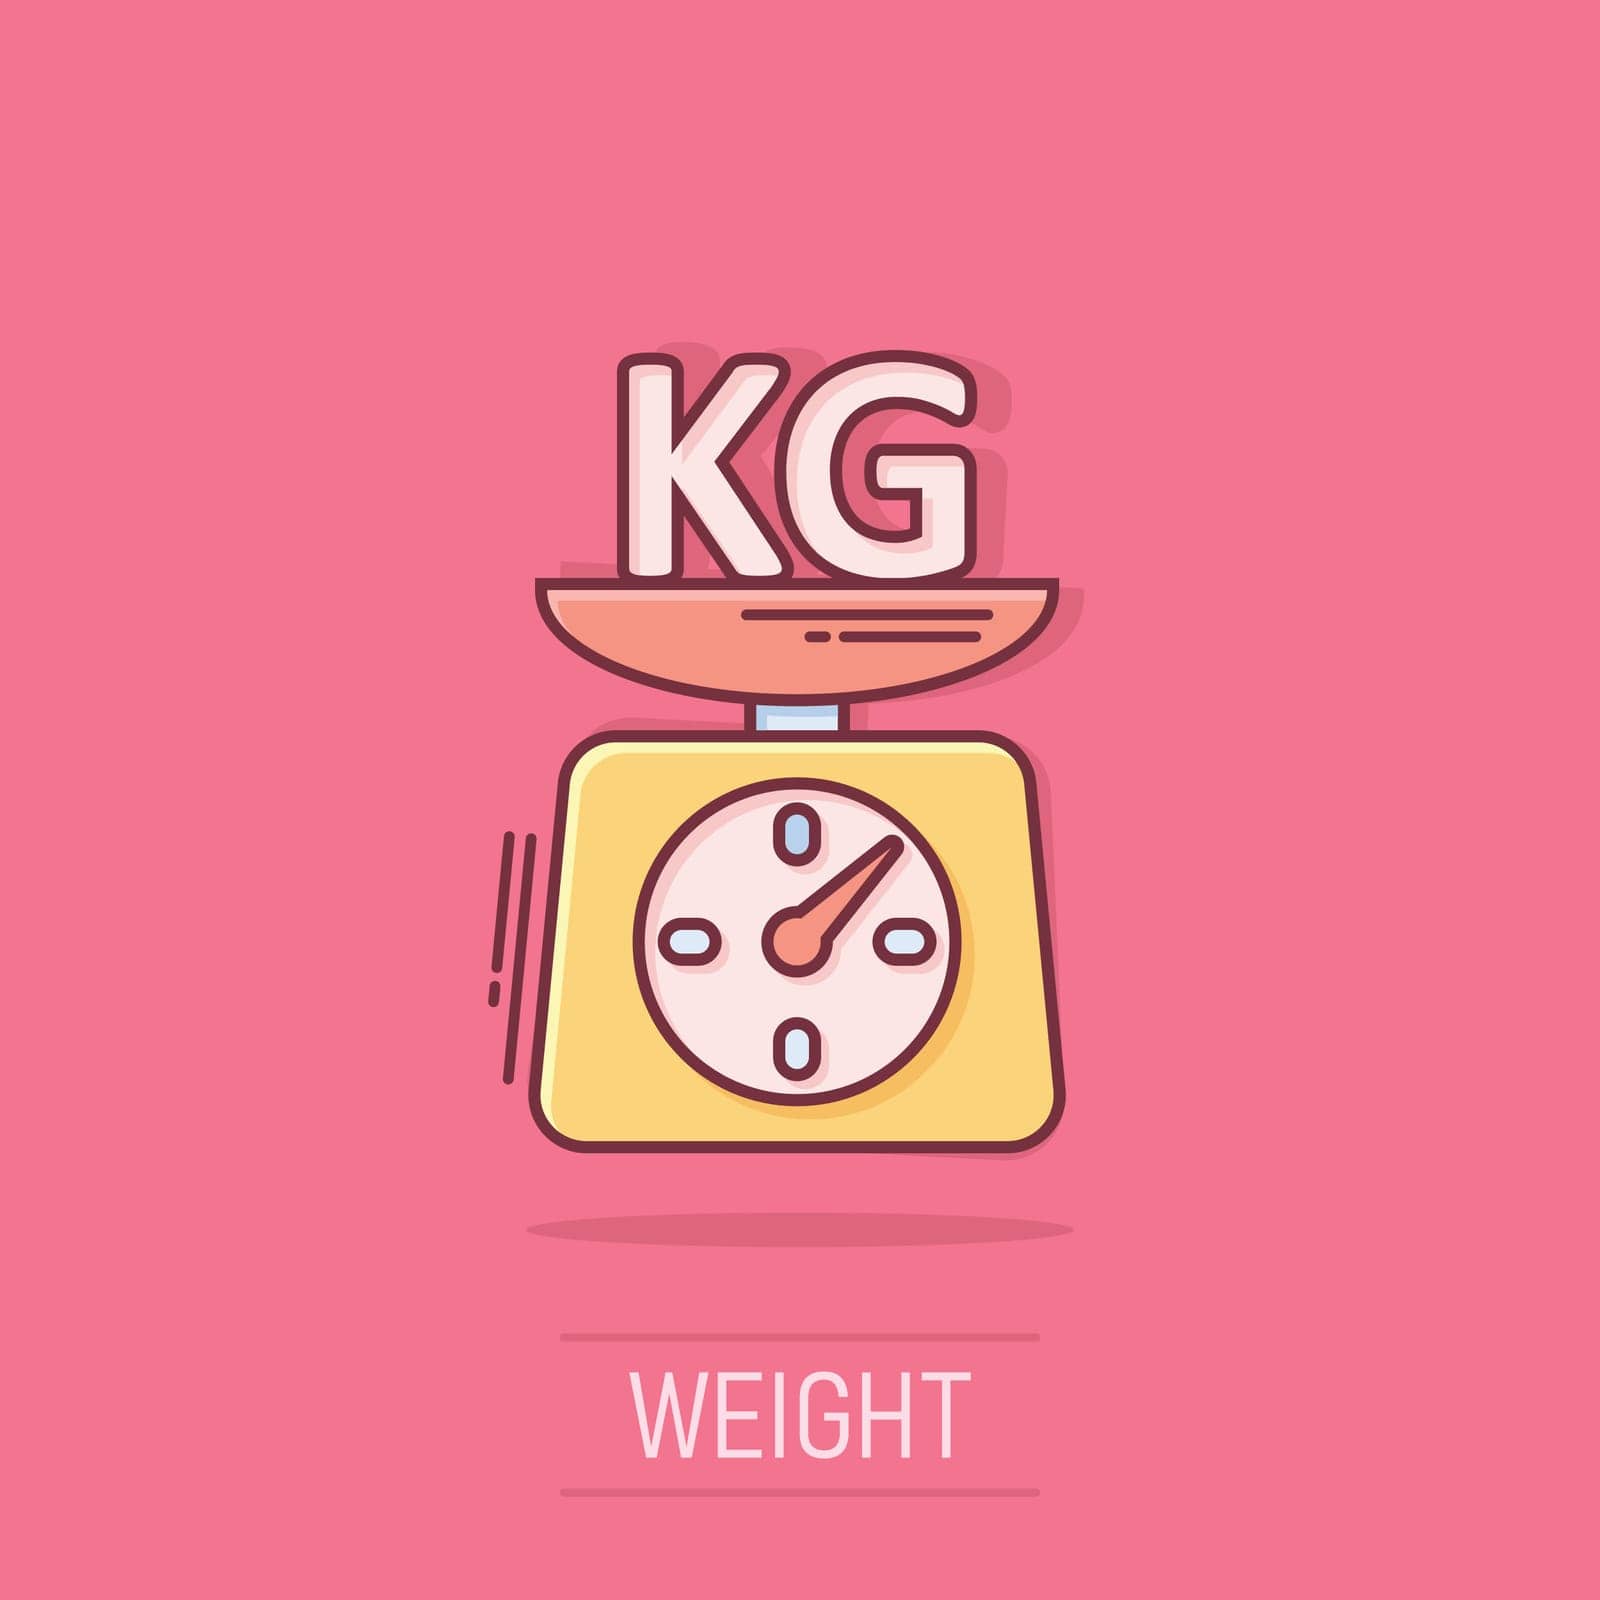 Scale icon in comic style. Kilogram dumbbell cartoon vector illustration on white isolated background. Gym splash effect business concept.